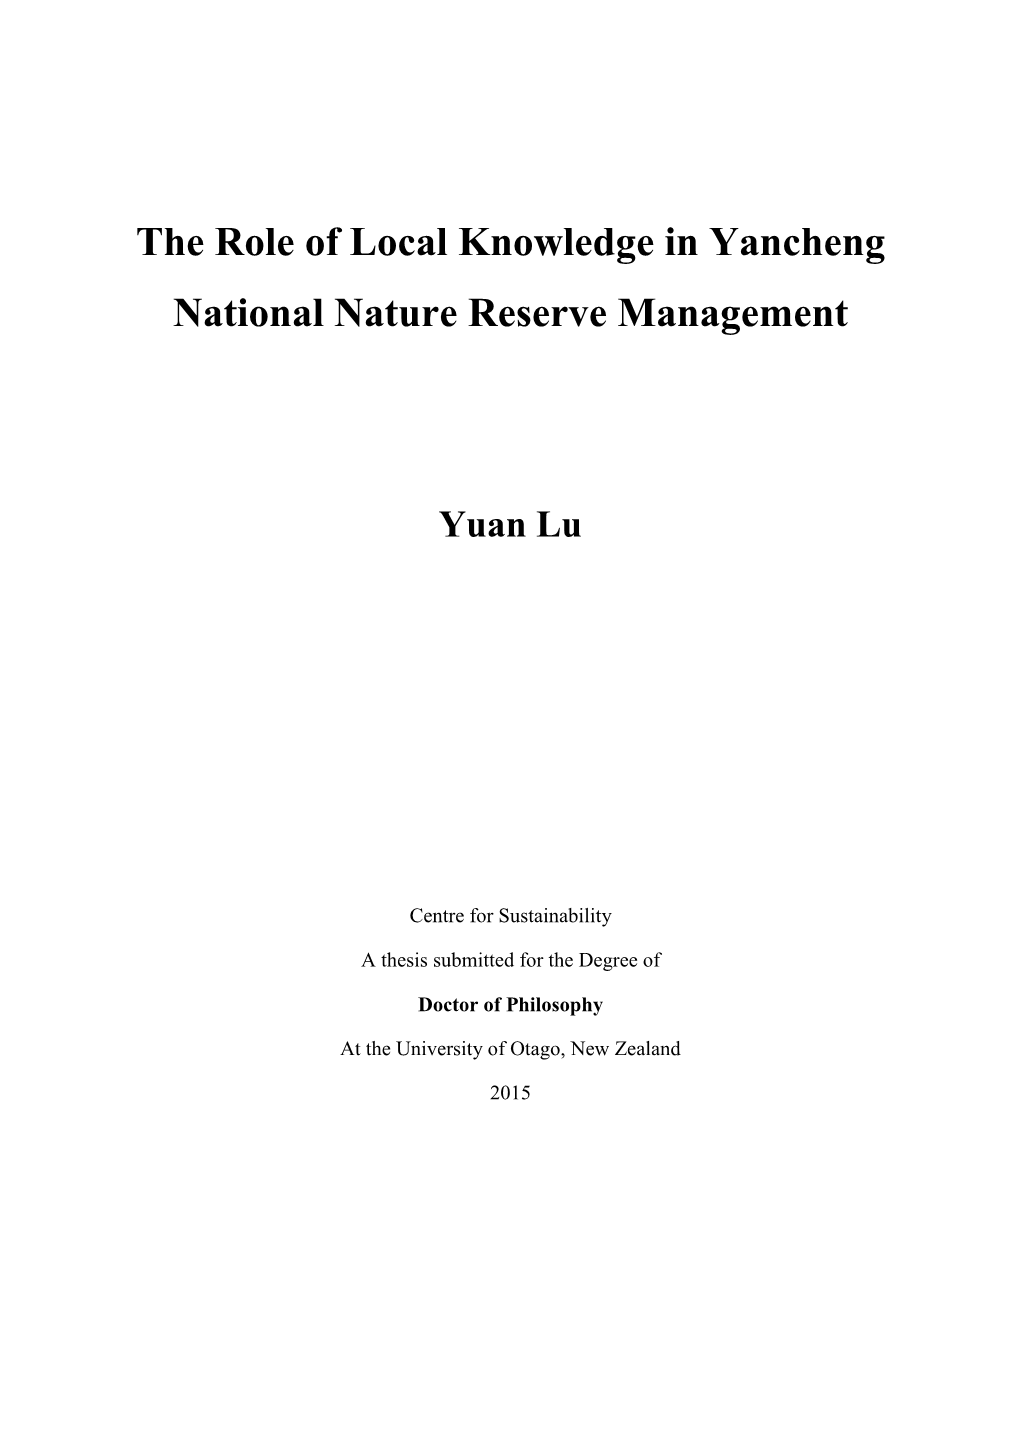 The Role of Local Knowledge in Yancheng National Nature Reserve Management